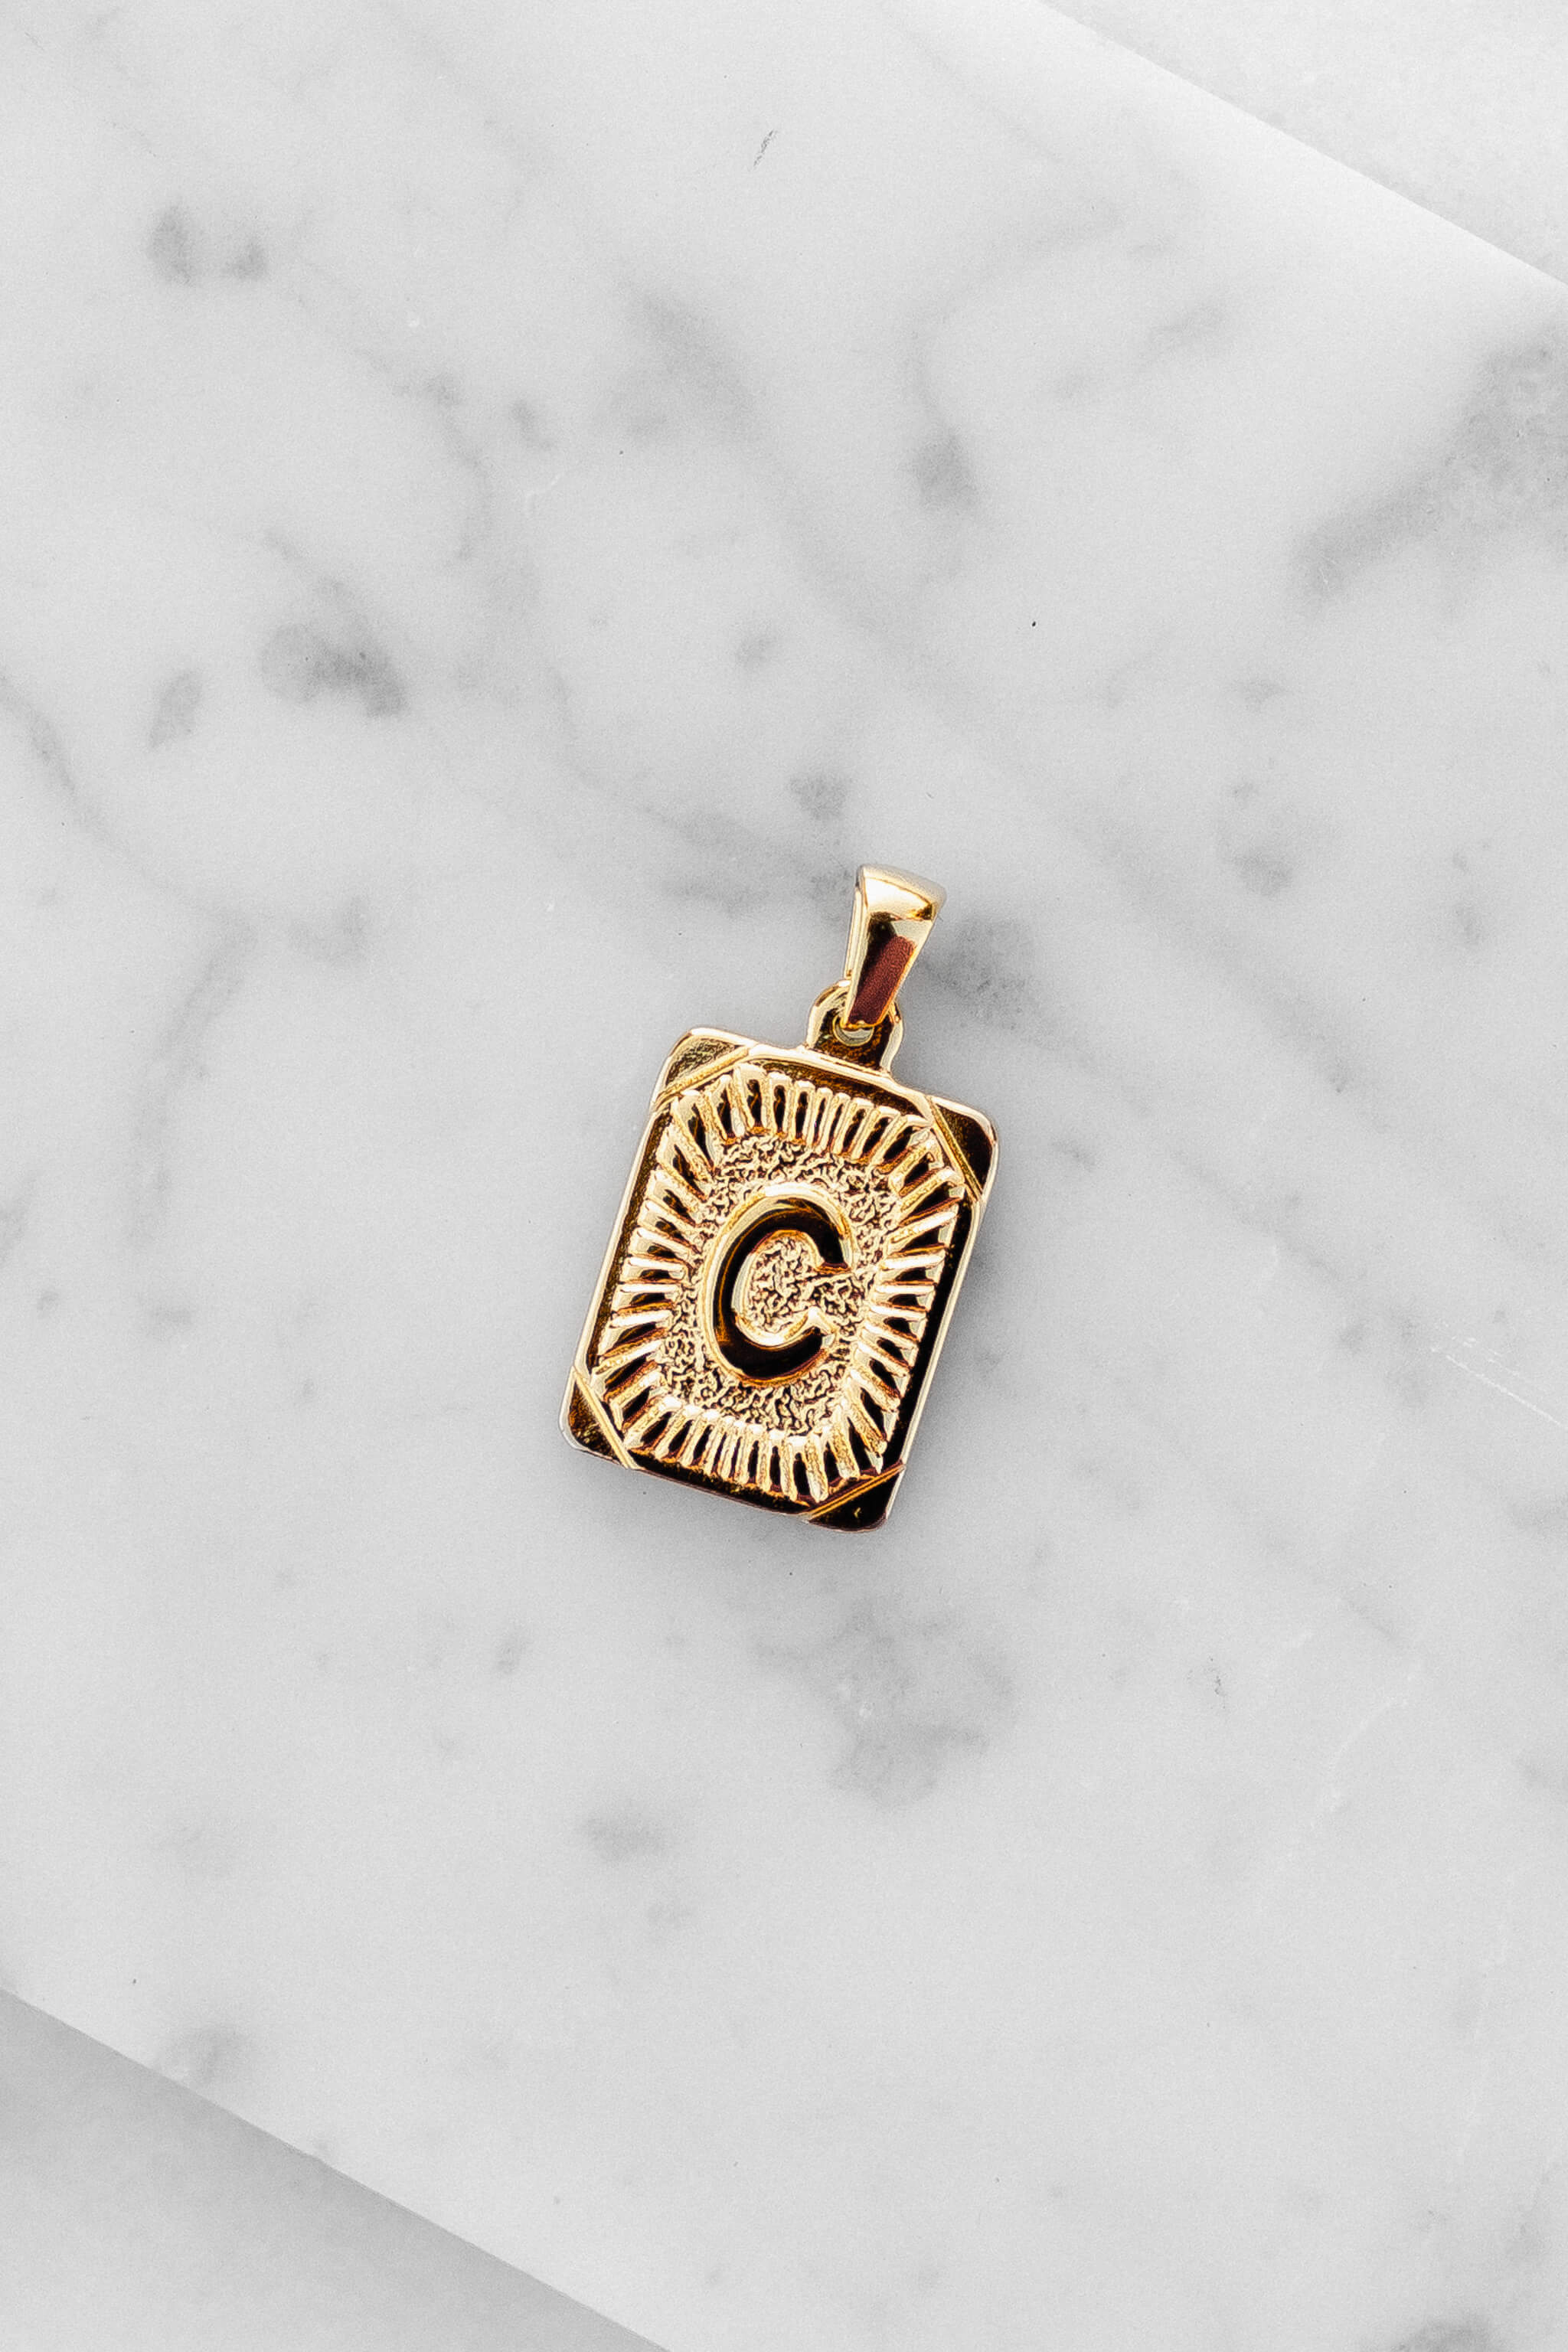 Gold Monogram Letter "C" Charm laying on a marble